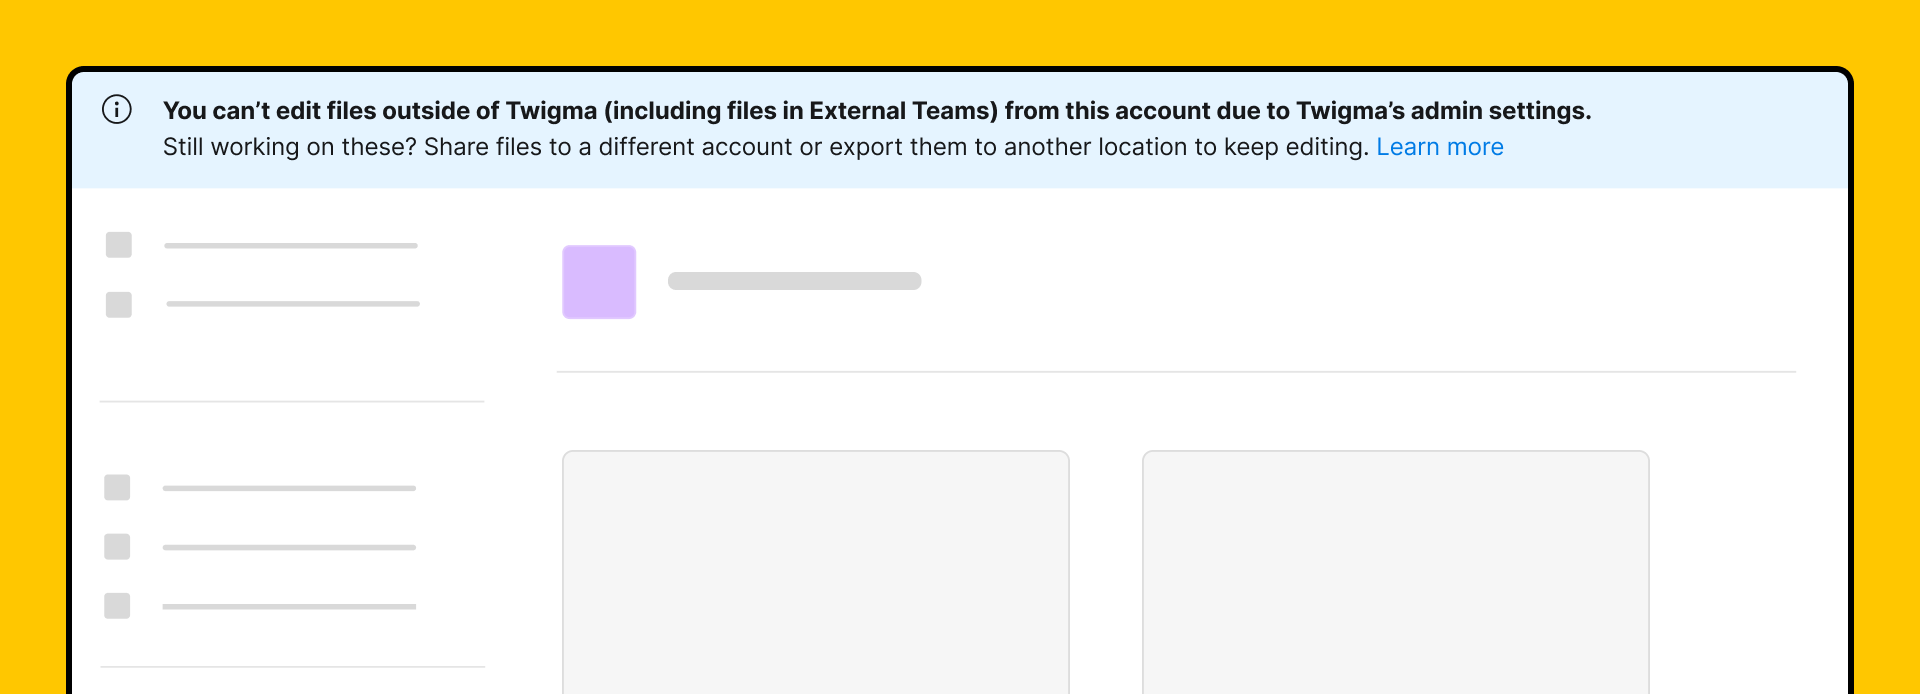 A screenshot showing the banner that appears in the External Teams space telling users that external content has been restricted